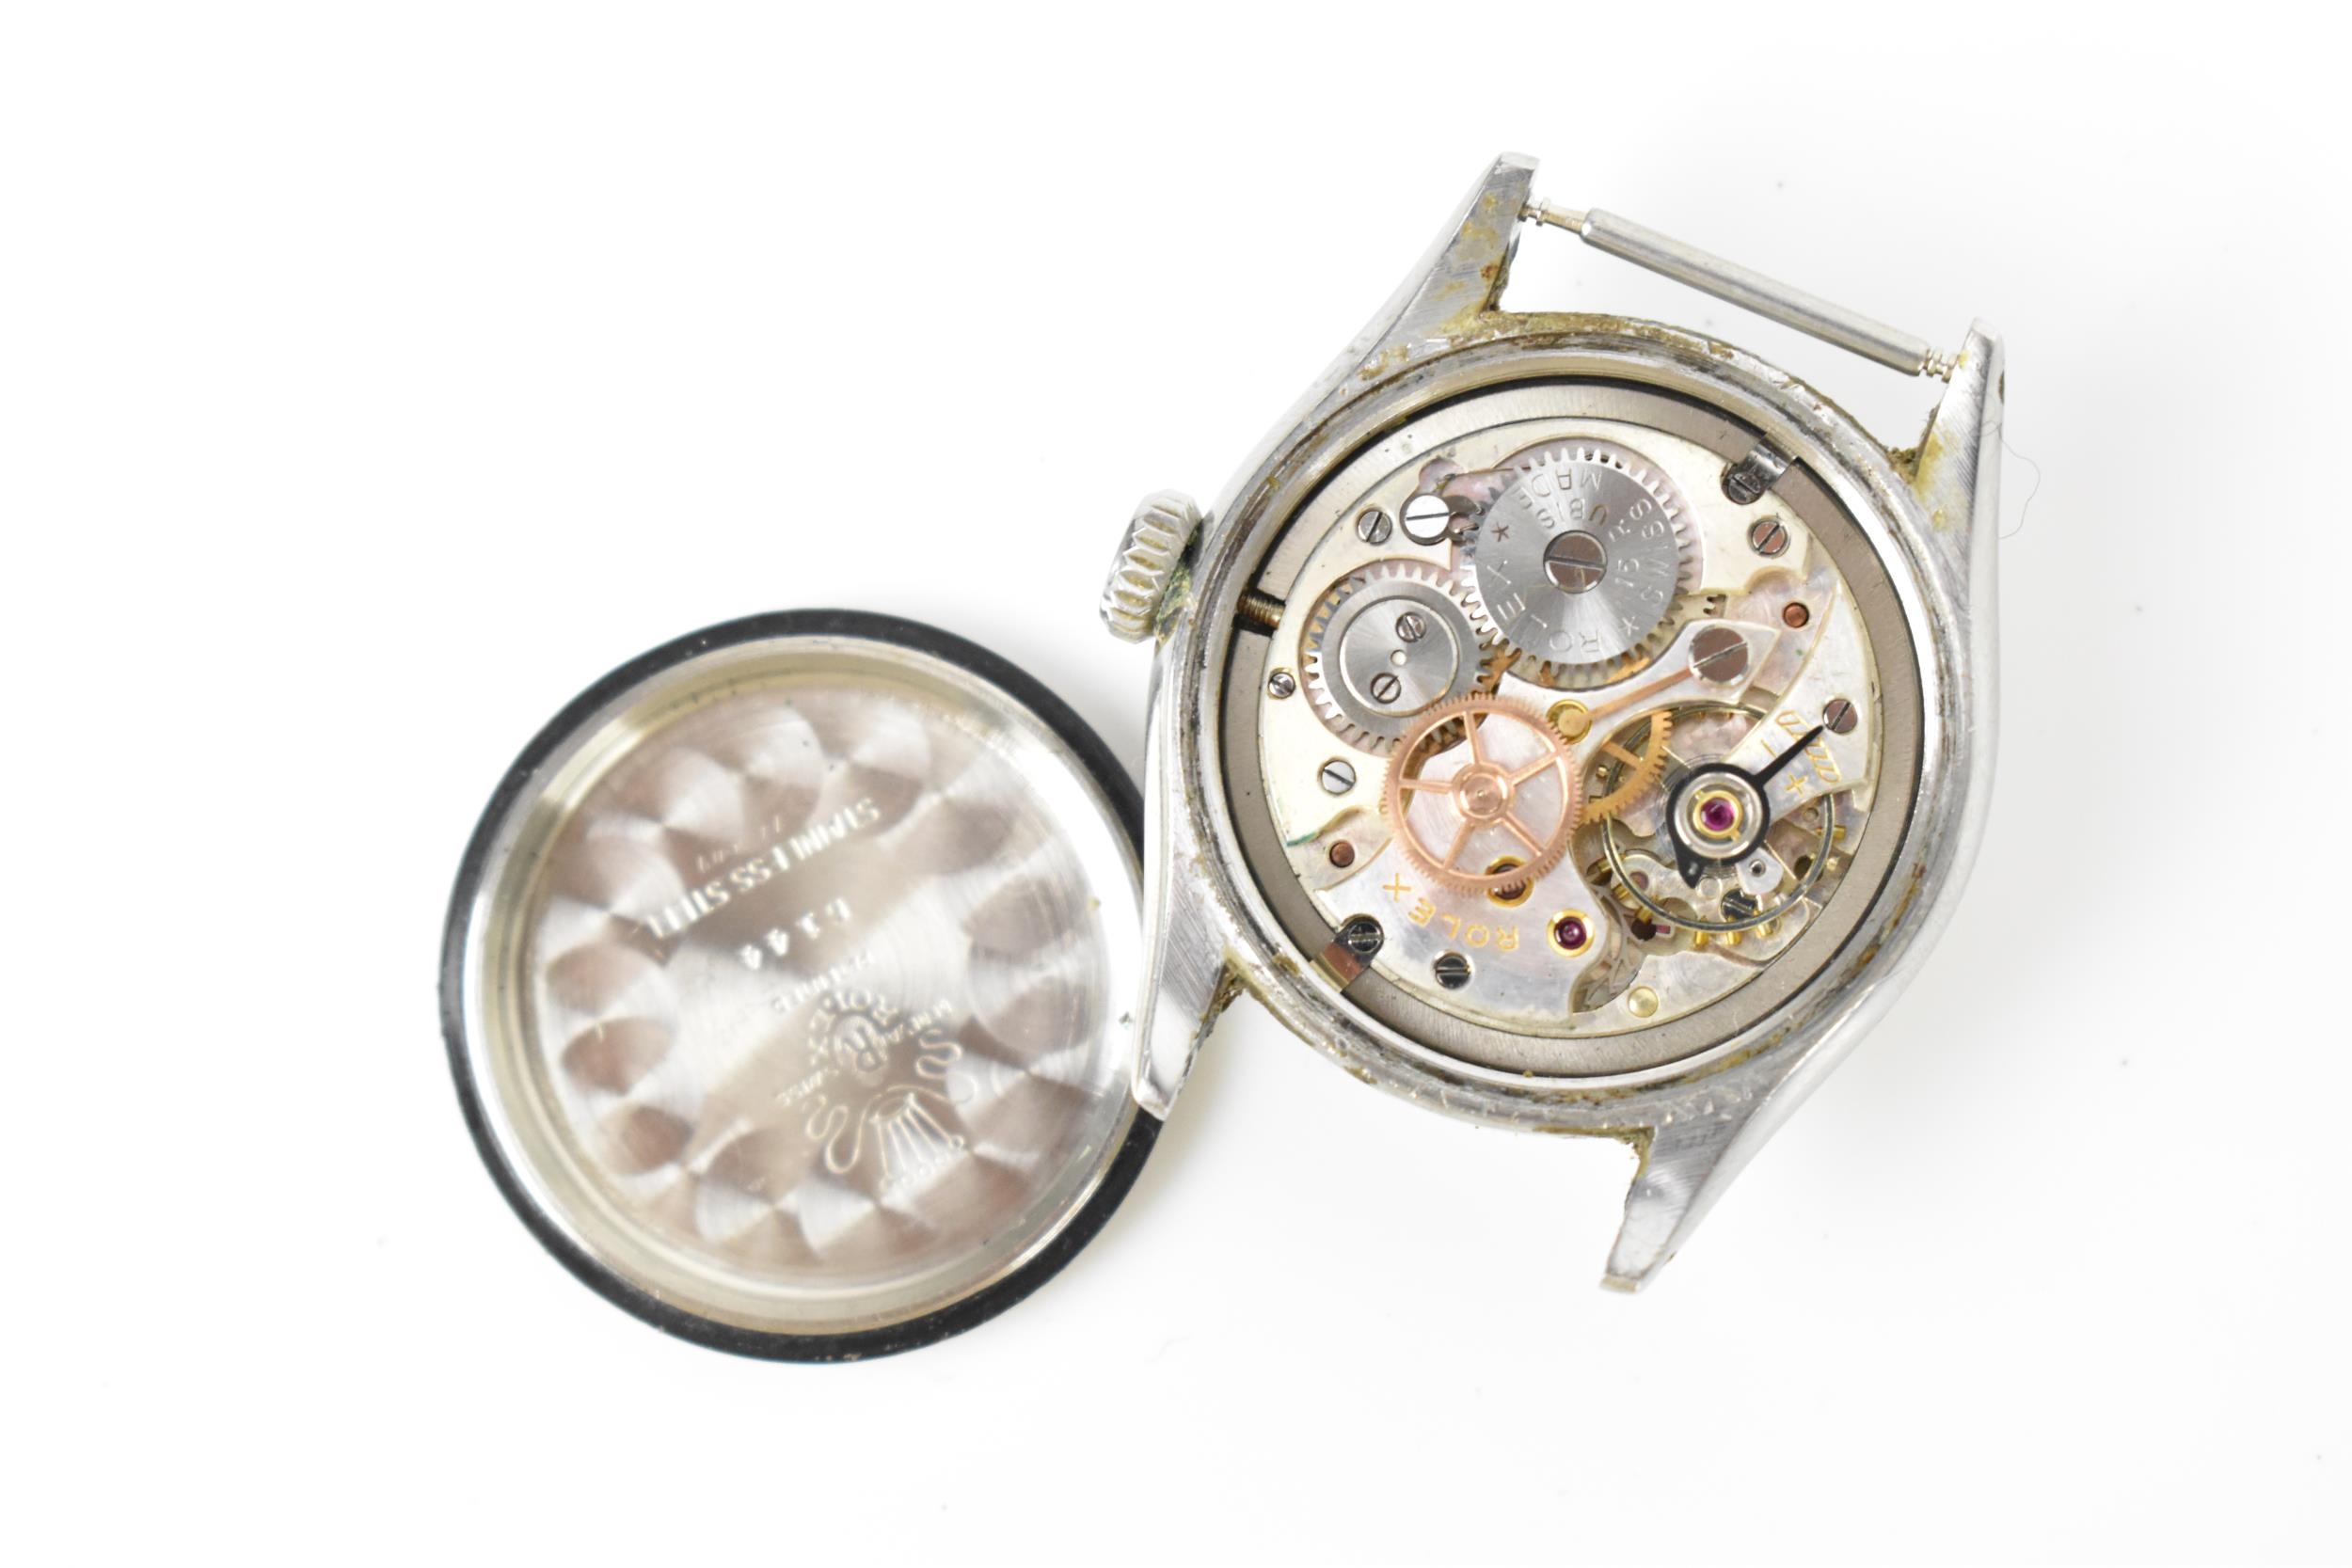 A Rolex Oyster Royal, mid size, manual wind, gents stainless steel wristwatch, circa 1962, having - Image 3 of 4